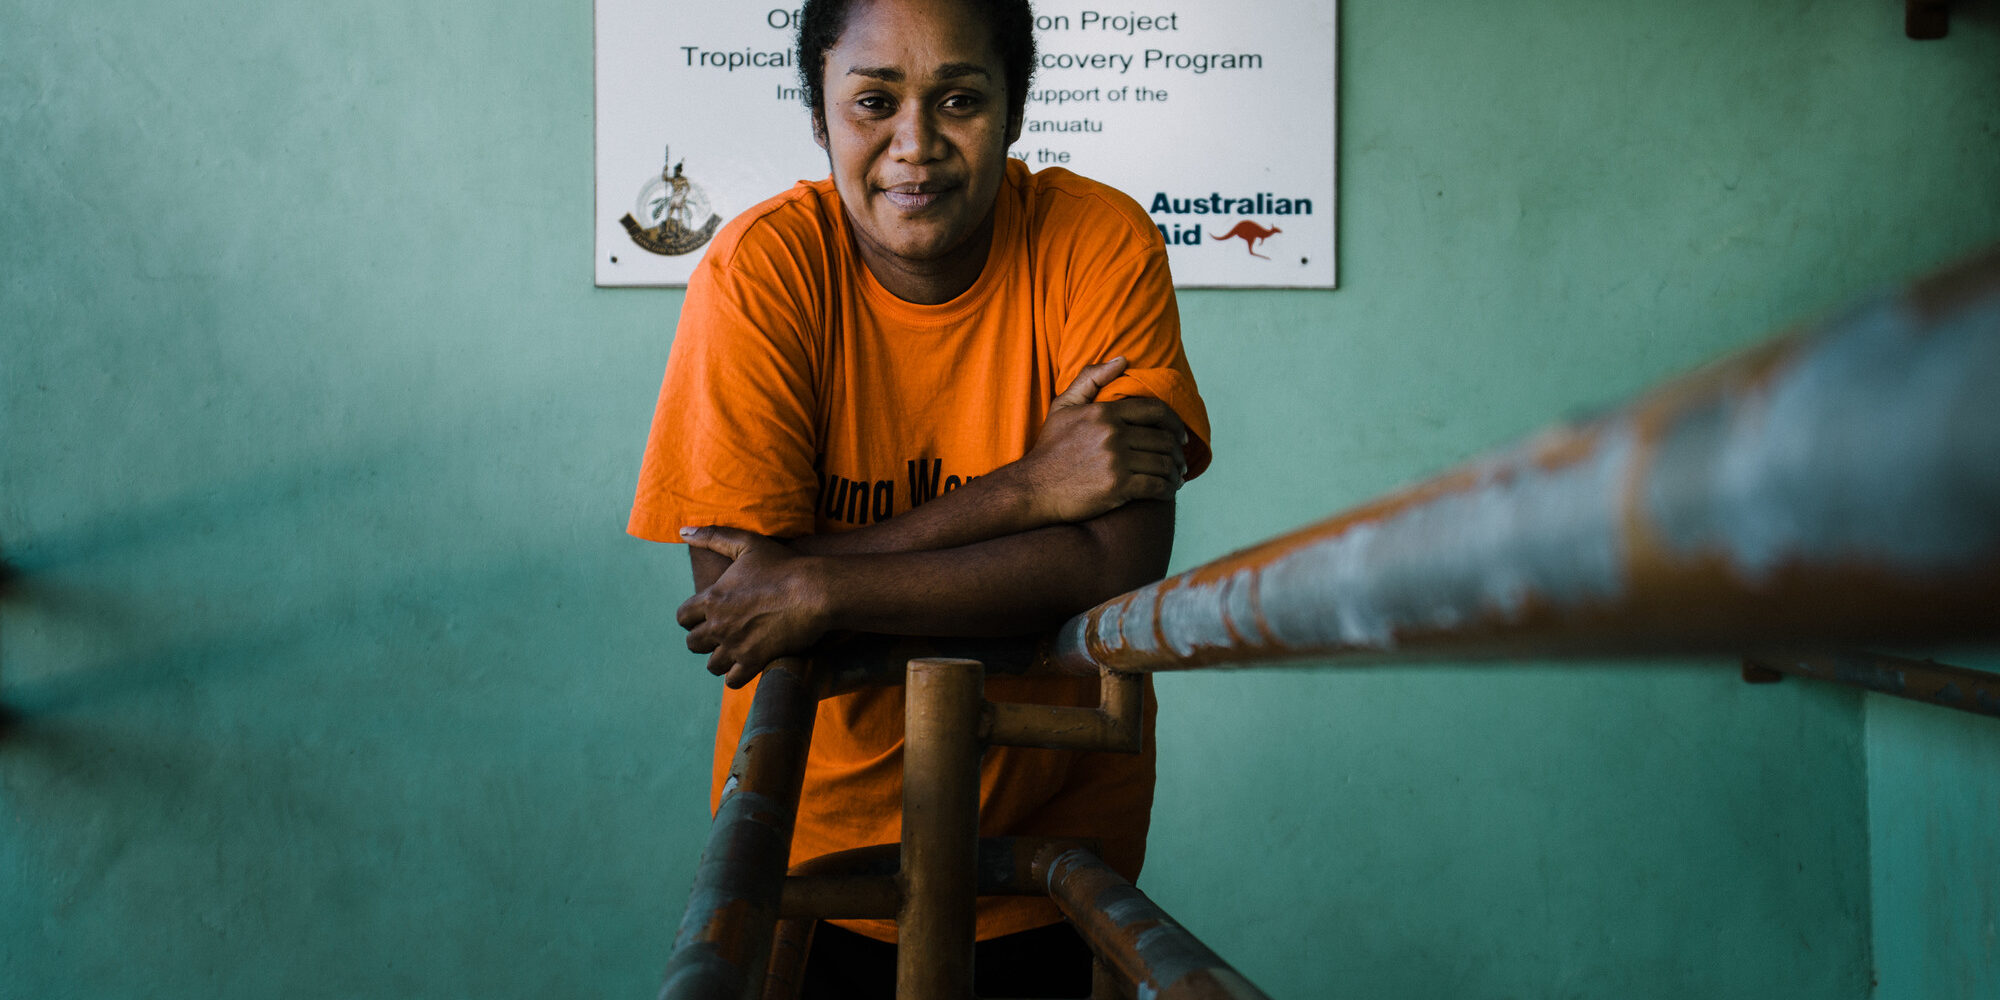 <p>Title:&nbsp;The Vanuatu Photo Project: Meet Talula &amp; Louisa&nbsp;</p>  <p>Summary:&nbsp;&quot;Include me, include all of us.&quot;&nbsp;</p>  <p>Author:&nbsp;By&nbsp;Talula, 2020-21 Young Women&#039;s Leadership Program graduate who manages the local business Eliane Passion Sewing and Designs&nbsp;</p>  <p>Link to story on care.org:&nbsp;&nbsp;<a href="https://www.care.org/news-and-stories/culture/the-vanuatu-photo-project-meet-talula-louisa/" rel="noreferrer noopener" target="_blank">https://www.care.org/news-and-stories/culture/the-vanuatu-photo-project-meet-talula-louisa/</a>&nbsp;</p>  <p>&nbsp;</p>  <p>Louisa, 30,&nbsp;grew up in the lovely settlement of&nbsp;Melemaat&nbsp;in Vanuatu with three brothers,&nbsp;and cousins&nbsp;who visited&nbsp;regularly.&nbsp;</p>  <p>For ten years, her mother was the caretaker of the Vanuatu Society for People with Disability,&nbsp;so while growing up,&nbsp;Louisa and her siblings&nbsp;interacted with many people&nbsp;who used the society&rsquo;s services. This sparked&nbsp;a&nbsp;desire&nbsp;in her&nbsp;to work with youth and children with&nbsp;disabilities.&nbsp;</p>  <p>For the&nbsp;past six years,&nbsp;Louisa&nbsp;has been the Housemaster at&nbsp;Onesua&nbsp;Presbyterian College.&nbsp;She explained,&nbsp;&ldquo;This job allows&nbsp;me to educate both boys and girls on how to take responsibility,&nbsp;look&nbsp;after their dorms, be on kitchen duty, help&nbsp;serve&nbsp;meals, wash their own clothes and participate in school activities.&rdquo; She&nbsp;also helps&nbsp;develop their&nbsp;public speaking&nbsp;skills to build confidence.&nbsp;&nbsp;</p>  <p>Through her work,&nbsp;Louisa&nbsp;realised&nbsp;she&nbsp;enjoys supporting and working with children&nbsp;with&nbsp;disabilities. She has&nbsp;observed&nbsp;how&nbsp;teachers handle&nbsp;children with disabilities in&nbsp;the classroom&nbsp;and reflected on incidents she has witnessed. Louisa&nbsp;shared a story about&nbsp;a young boy&nbsp;who&nbsp;was&nbsp;teased because of&nbsp;his disability,&nbsp;sometimes to the point where&nbsp;he&nbsp;would come home and tell his mother that he doesn&rsquo;t want to go to school anymore.&nbsp;Louisa&nbsp;is outraged by&nbsp;such unfair and mean-spirited&nbsp;treatment. She&nbsp;exclaimed,&nbsp;&ldquo;Where is the equality in that? Instead of helping him,&nbsp;they turned against him!&rdquo; She feels&nbsp;that discrimination is even worse between children of the same gender.&nbsp;Louisa&nbsp;spoke&nbsp;of&nbsp;an incident she witnessed&nbsp;involving&nbsp;a girl&nbsp;with a disability&nbsp;being physically harassed on a bus by a group of other girls.&nbsp;&ldquo;Where exactly is the love and equality in that?&rdquo; Louisa&nbsp;demanded.&nbsp;</p>  <p>As she was starting to&nbsp;recognise&nbsp;this&nbsp;interest in working with young people with disabilities, she heard about CARE&rsquo;s Young Women&rsquo;s Leadership Program&nbsp;(YWLP).&nbsp;Louisa&nbsp;was particularly interested in learning to better support women and girls with&nbsp;disabilities&nbsp;who&nbsp;face&nbsp;violence and discrimination&nbsp;because of their disability.&nbsp;&ldquo;Before, I was a leader but didn&rsquo;t know exactly what I was doing,&rdquo; she&nbsp;said.&nbsp;&nbsp;</p>  <p>She felt that throughout&nbsp;the YWLP,&nbsp;and especially after graduating in 2021,&nbsp;she had found her way from the darkness into the light. The program has&nbsp;empowered and&nbsp;supported her in becoming who she aspires to be and is&nbsp;inspiring others to become the best versions&nbsp;of themselves.&nbsp;&nbsp;</p>  <p>Regardless of the obstacles,&nbsp;achieving&nbsp;gender equality within the disability community is&nbsp;essential&nbsp;to&nbsp;combatting&nbsp;violence against&nbsp;all&nbsp;women and girls. Louisa stands by this&nbsp;Bislama&nbsp;mantra,&nbsp;&ldquo;Inkludim&nbsp;mi,&nbsp;mo&nbsp;inkludim&nbsp;yumi&nbsp;everiwan&rdquo; which&nbsp;translates to&nbsp;&ldquo;Include me, and include all of us.&rdquo;&nbsp;A&nbsp;reminder that we all count and that should always lead the way.&nbsp;&nbsp;</p>  <p>The Vanuatu Young Women&#039;s Leadership Program (YWLP) is implemented by CARE in Vanuatu with the generous support of the AustralianGovernment. The YWLP is a12-month program which promotes the leadership of young women so they can take action to promote gender equality and eliminate violence against women and young girls in Vanuatu. Over&nbsp;eighty&nbsp;young women aged 18 to 30, including women with disabilities and diverse gender identities, have graduated from the program since it started in 2017. These graduates are now using the knowledge, skills and confidence strengthened through the YWLP to&nbsp;realise&nbsp;gender equality in their families, communities and across Vanuatu. All the young women featured in these stories, and&nbsp;those who captured their photographs and stories,&nbsp;are YWLP graduates.&nbsp;</p>